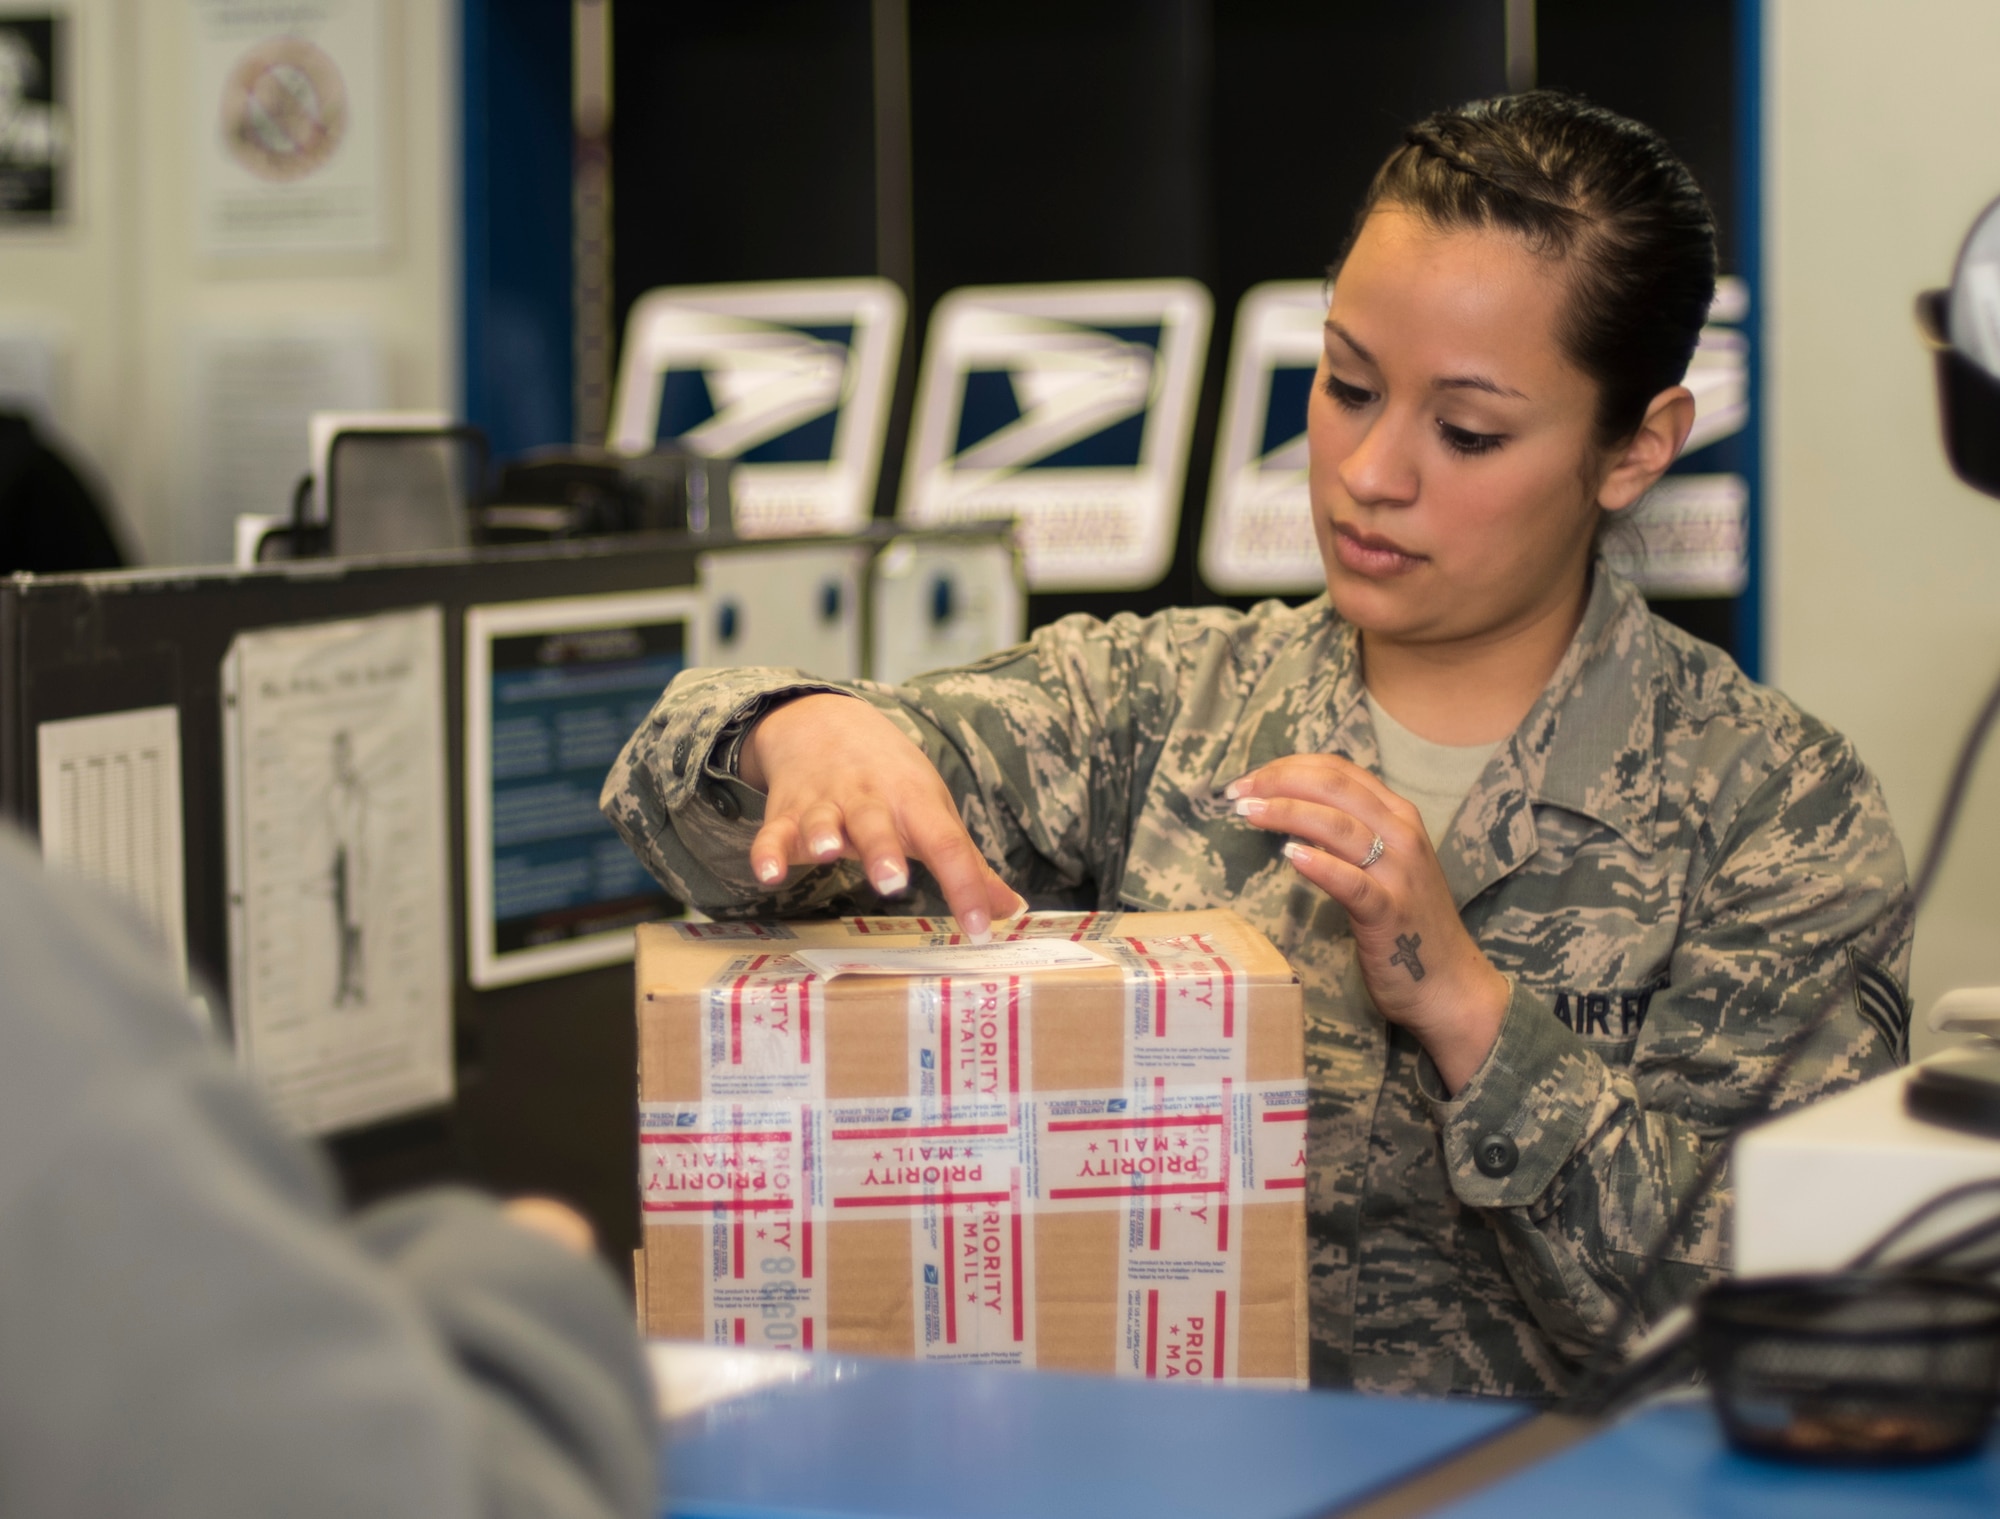 U.S. Air Force Senior Airman Maria Steelman, a postal clerk with the 35th Communications Squadron, labels a package at Misawa Air Base, Japan, Jan. 27, 2016. Steelman’s daily job consists of processing outgoing mail for customers and ensuring each customer’s individual needs are met. (U.S. Air Force photo by U.S. Air Force photo by Senior Airman Brittany A. Chase)